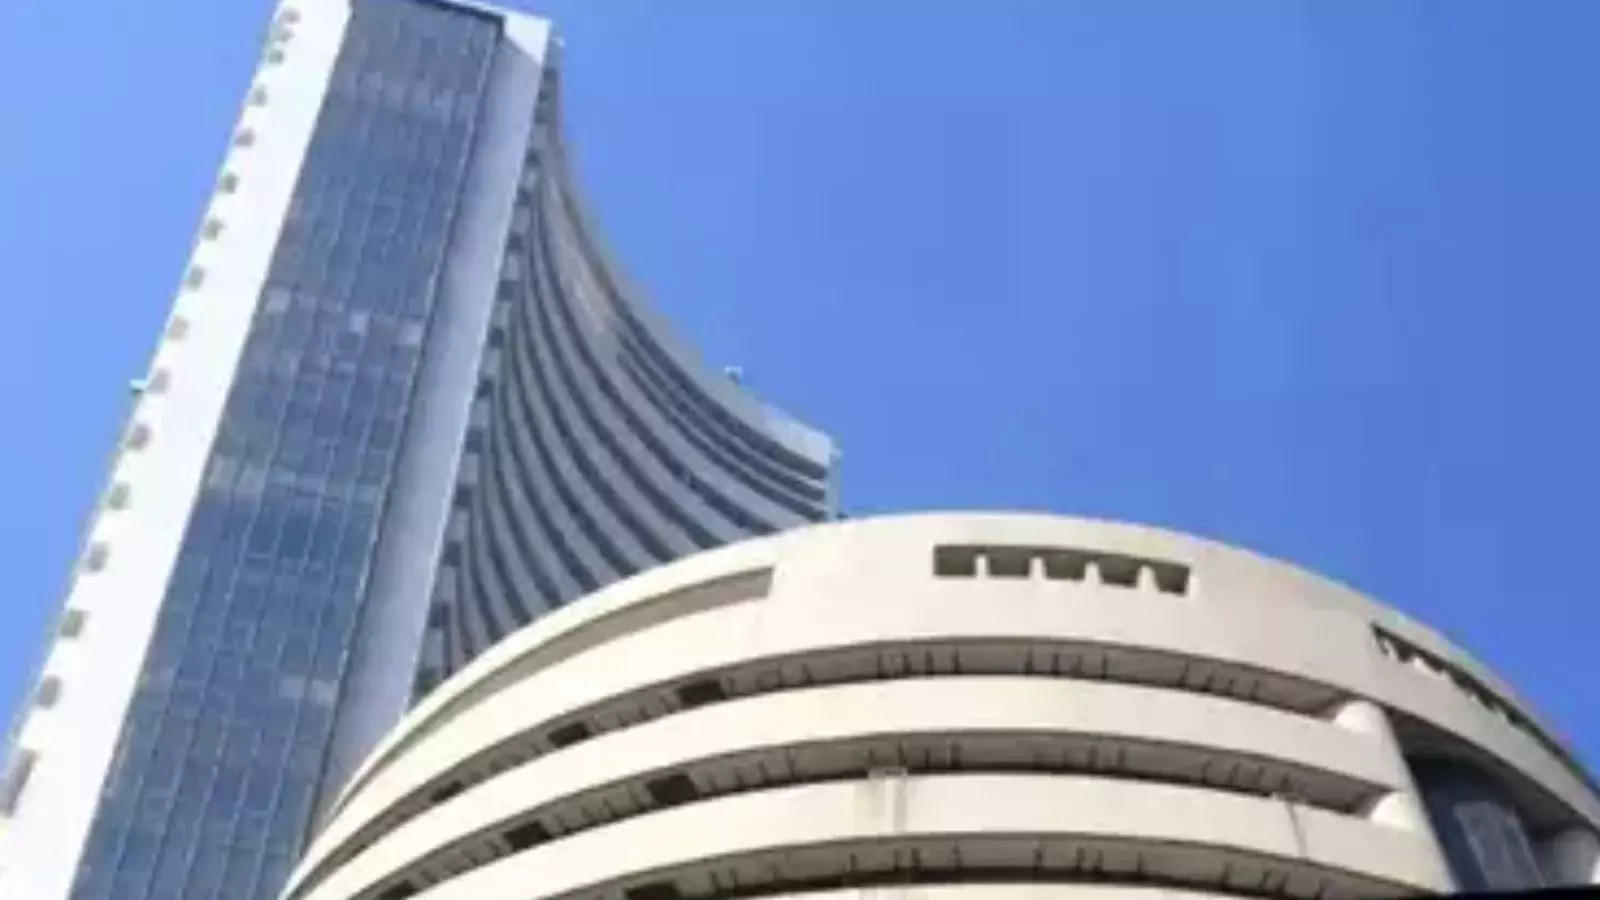 Sensex and Nifty closed below 58800 and 17500 respectively